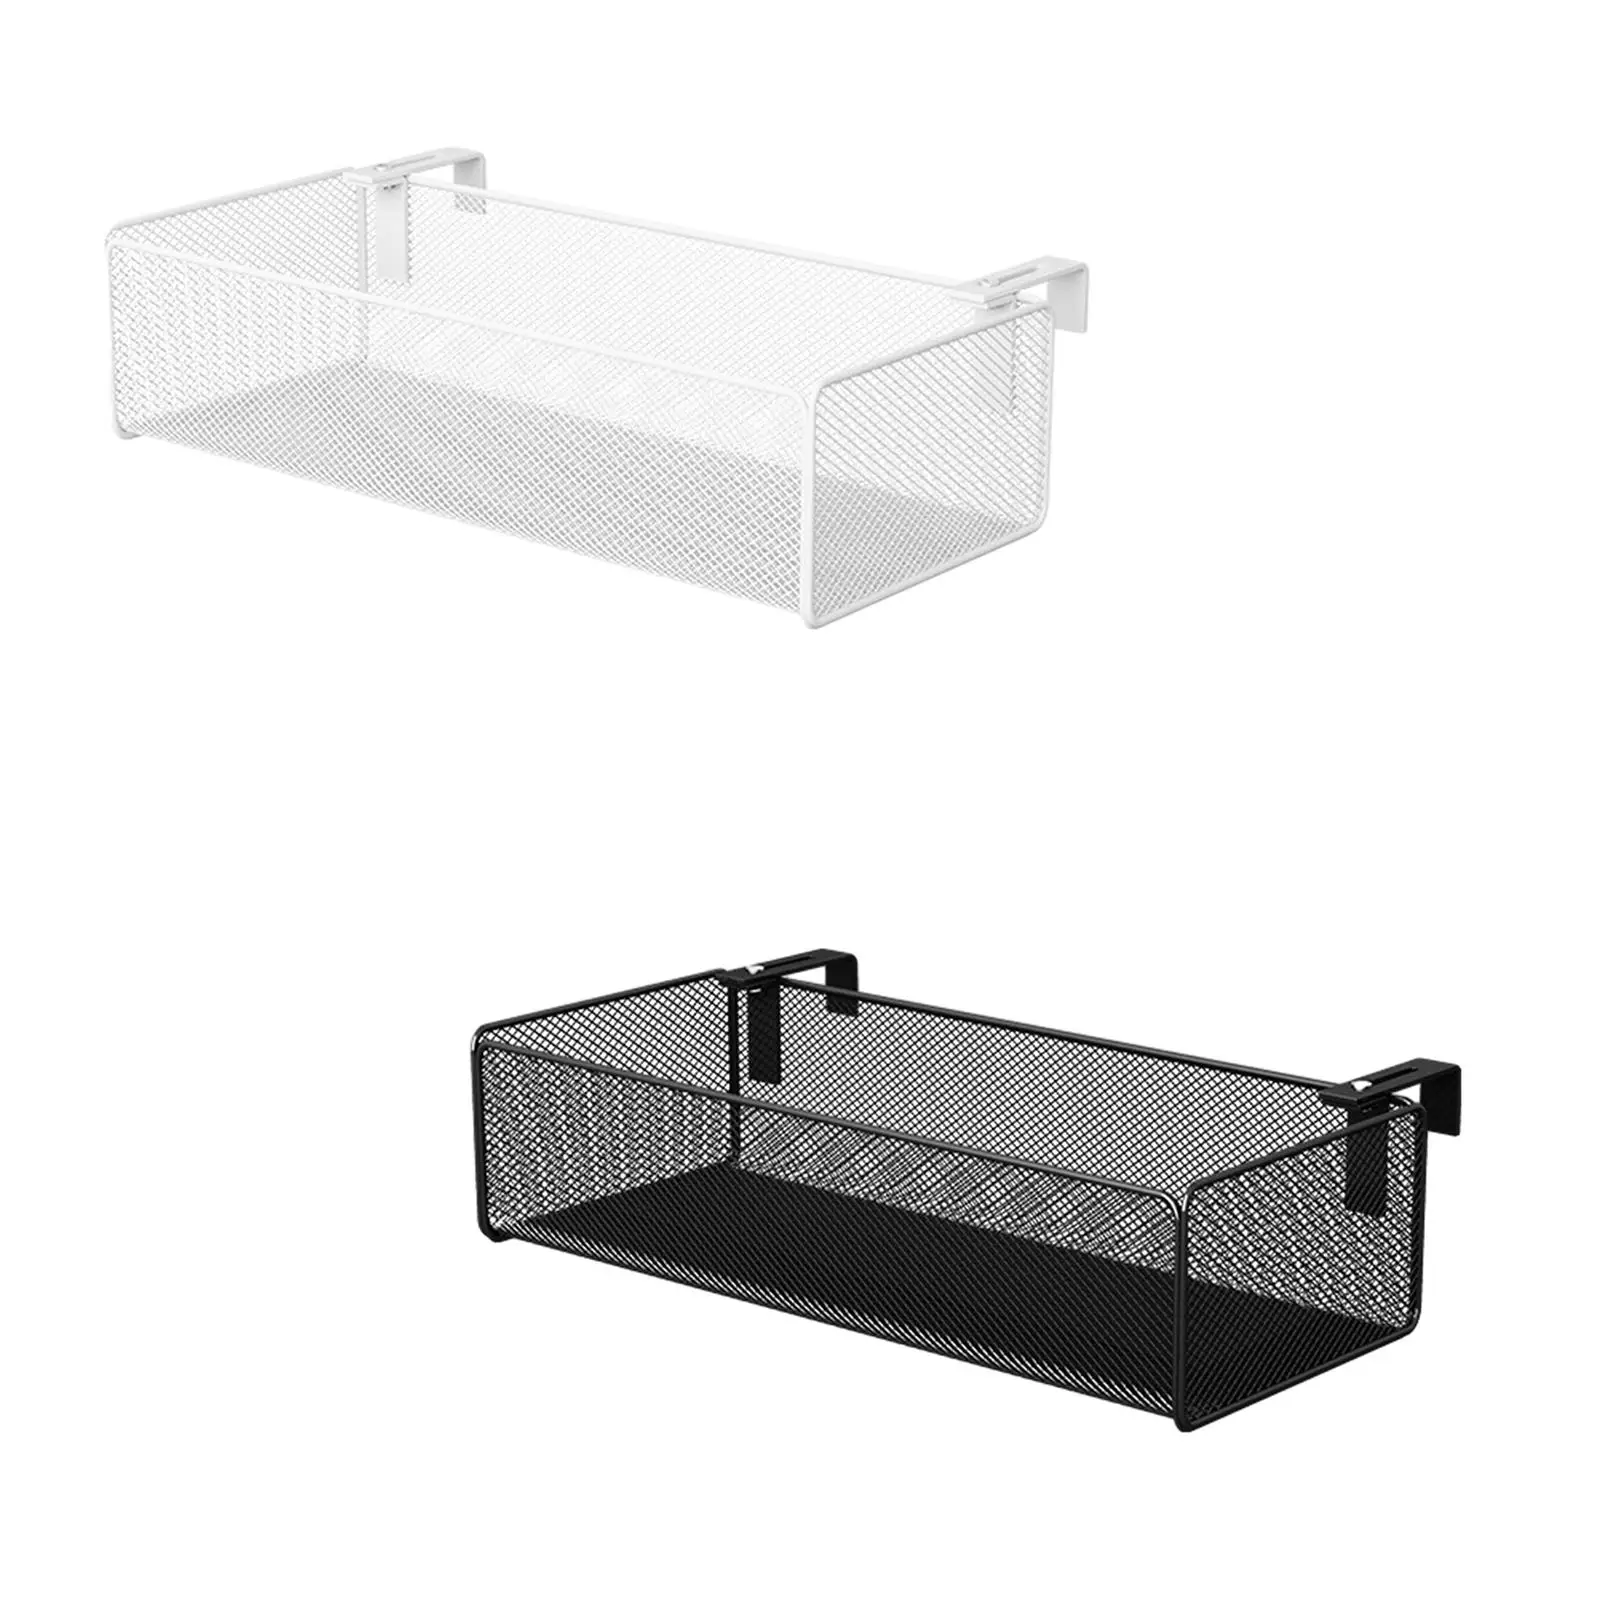 Office Desk Divider Hanging Storage Basket Accessory 14.5x6x3.5inch Metal Mesh for Storing Books, Phone, Magazine Easily Install